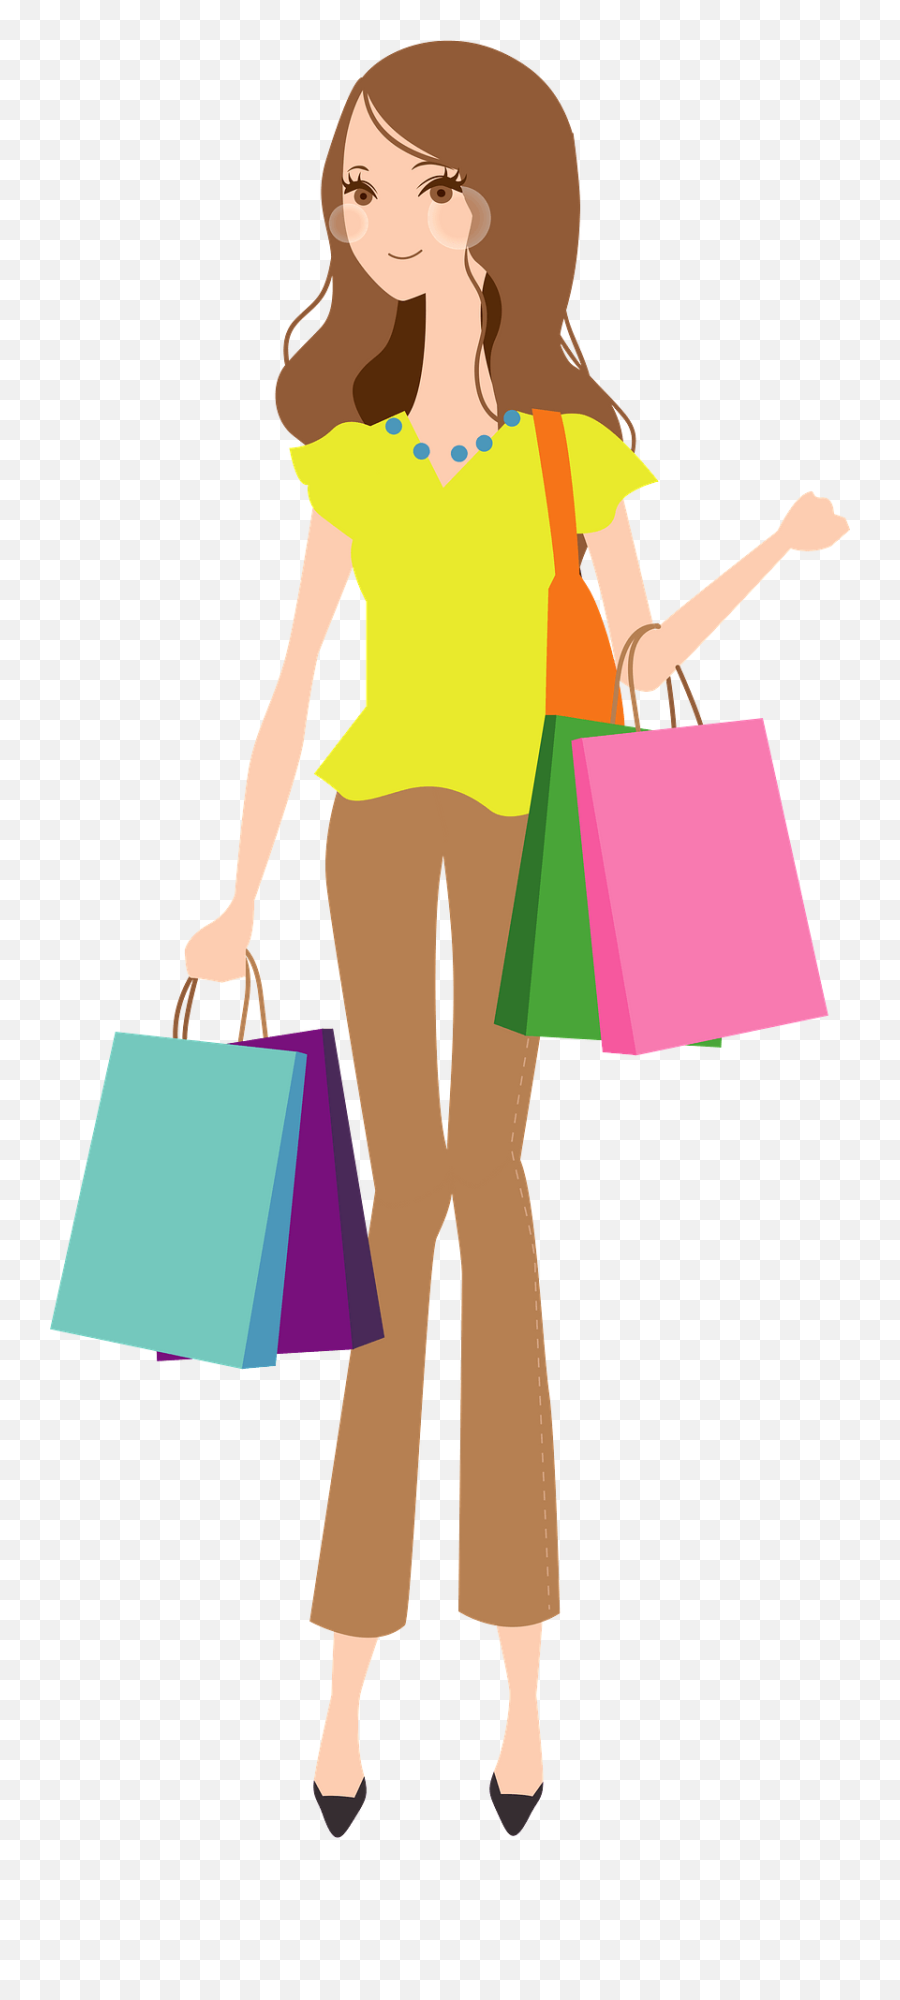 Woman Is Holding Shopping Bags Clipart - Girl Carying Shopping Bag Clipart Emoji,Shopping Bag Clipart